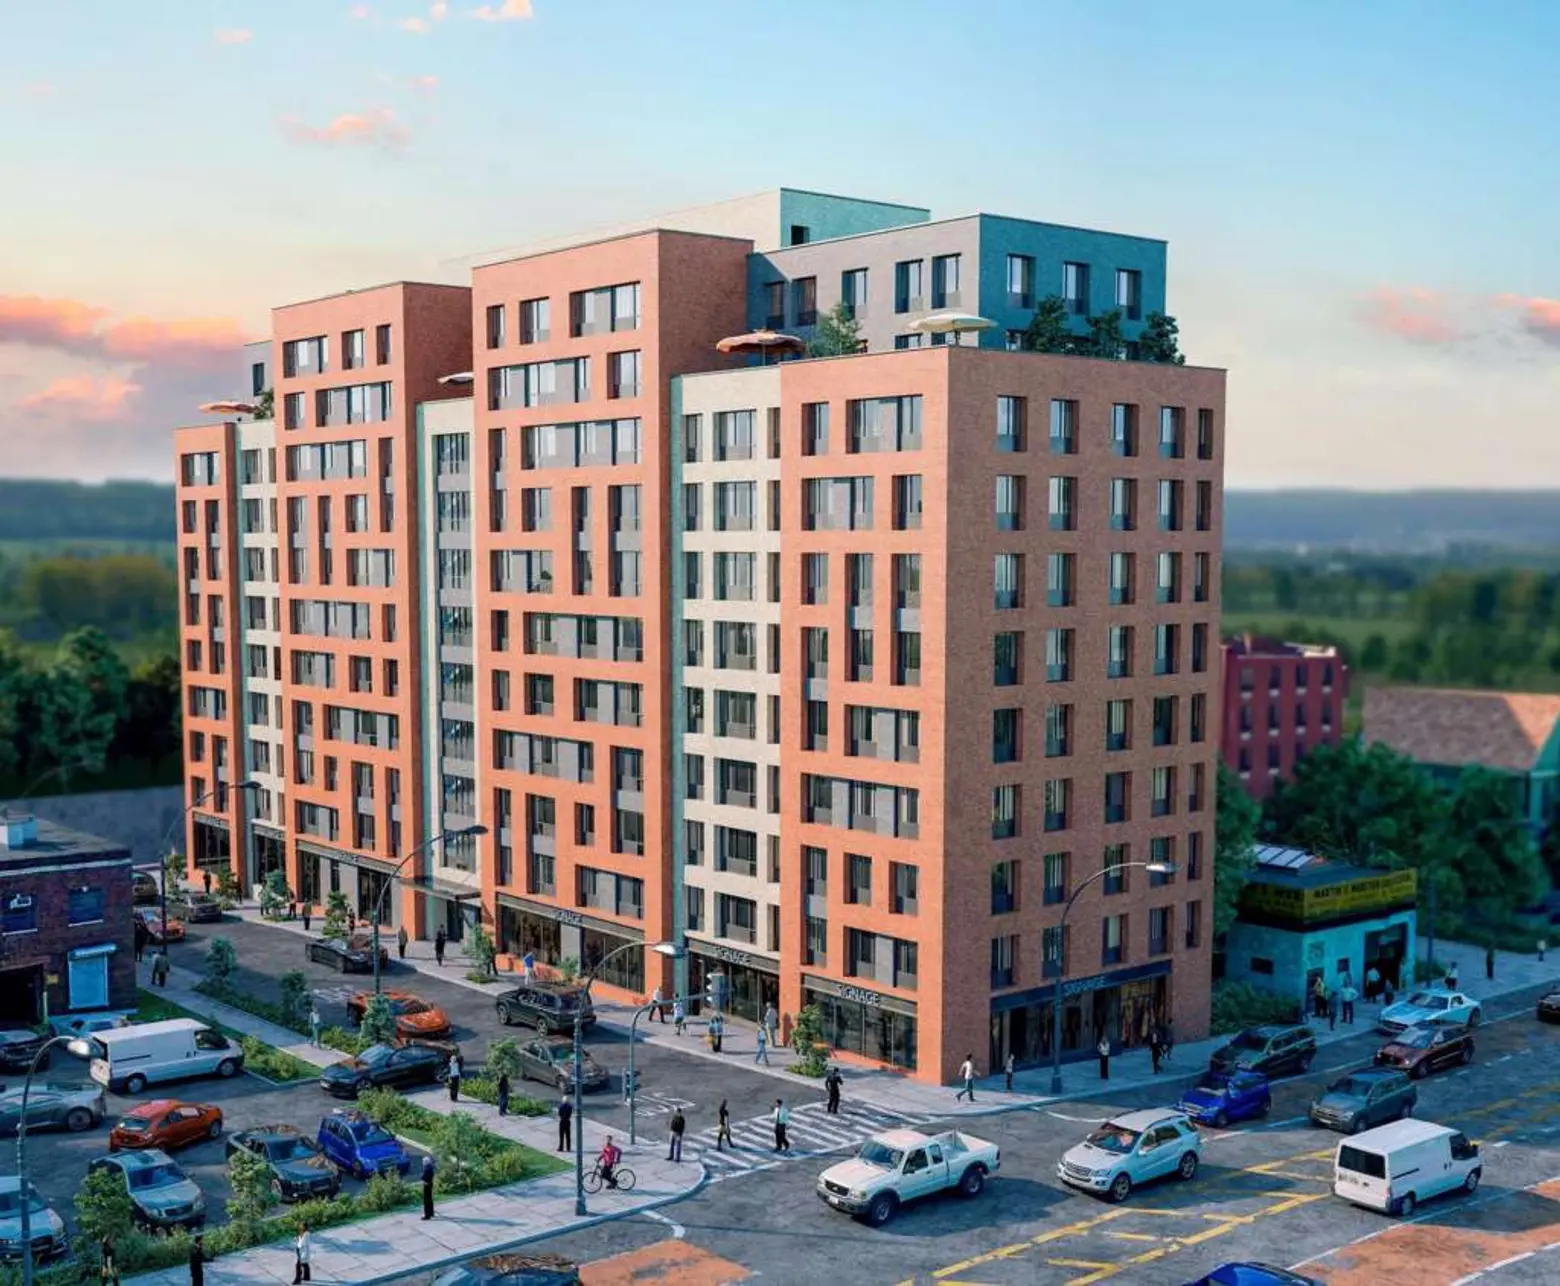 Apply for 117 affordable units at a new mixed-use rental in the Bronx, starting at $865/month